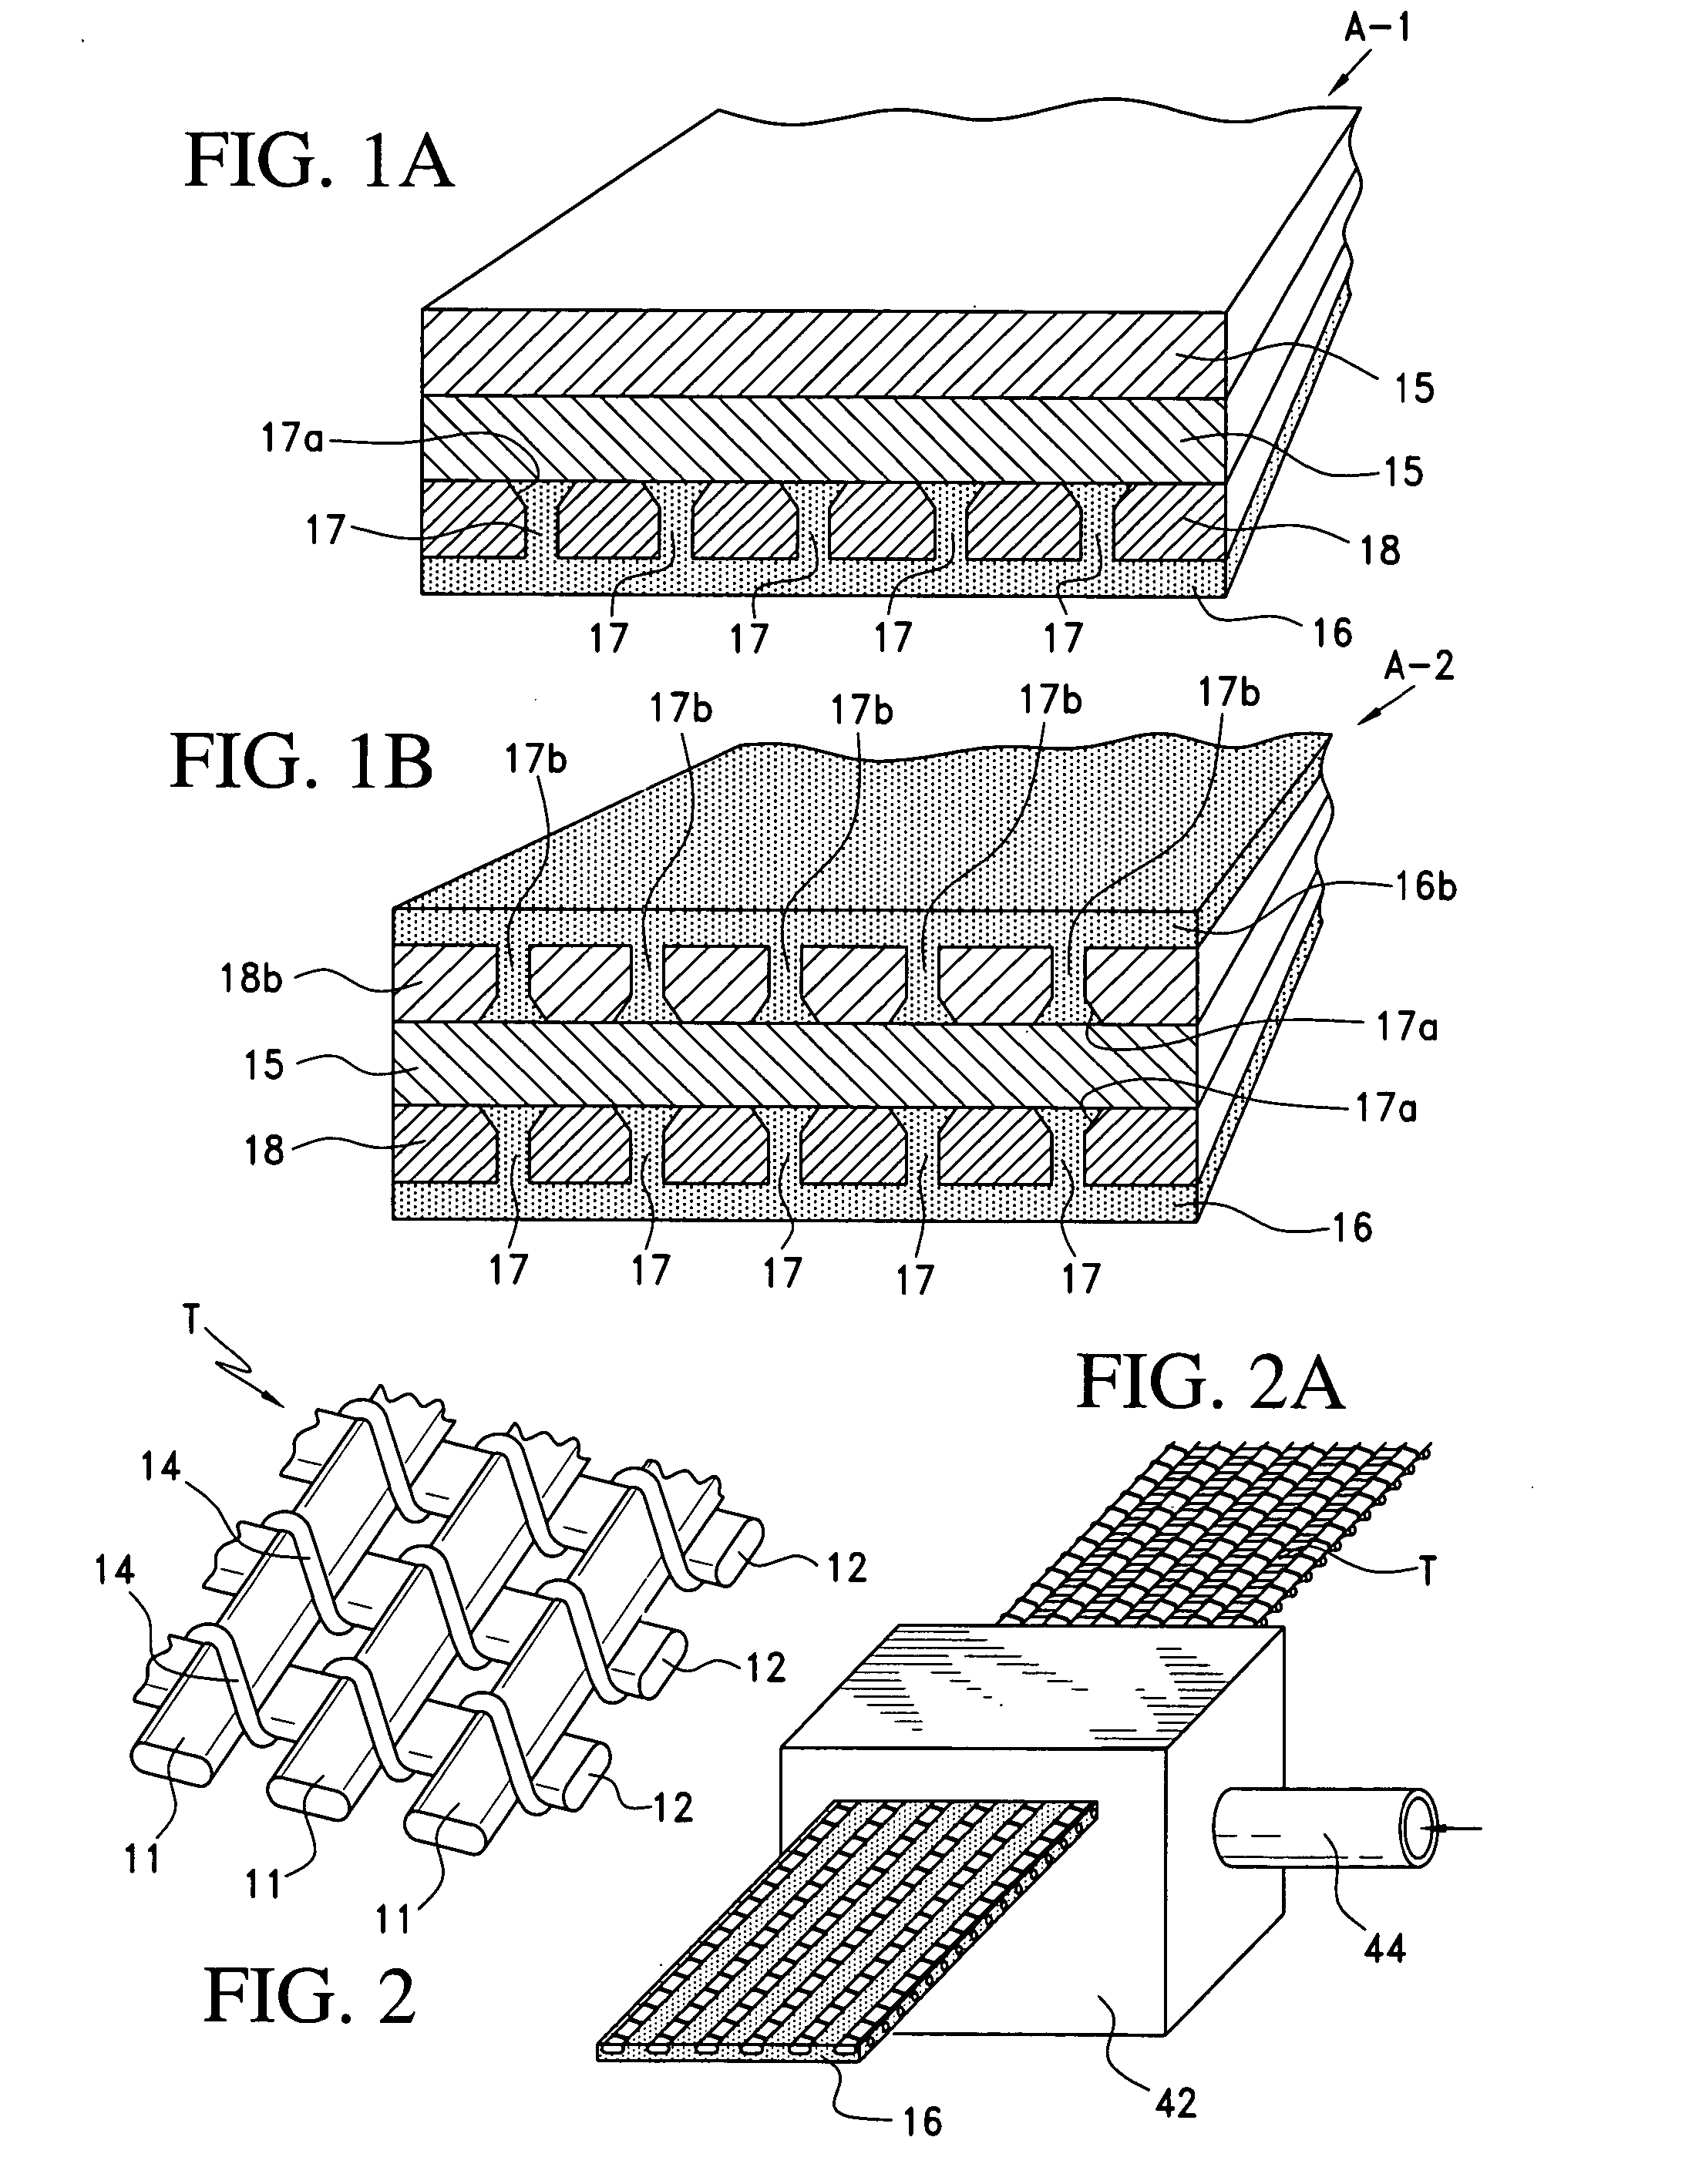 Anti-collapse system and method of manufacture